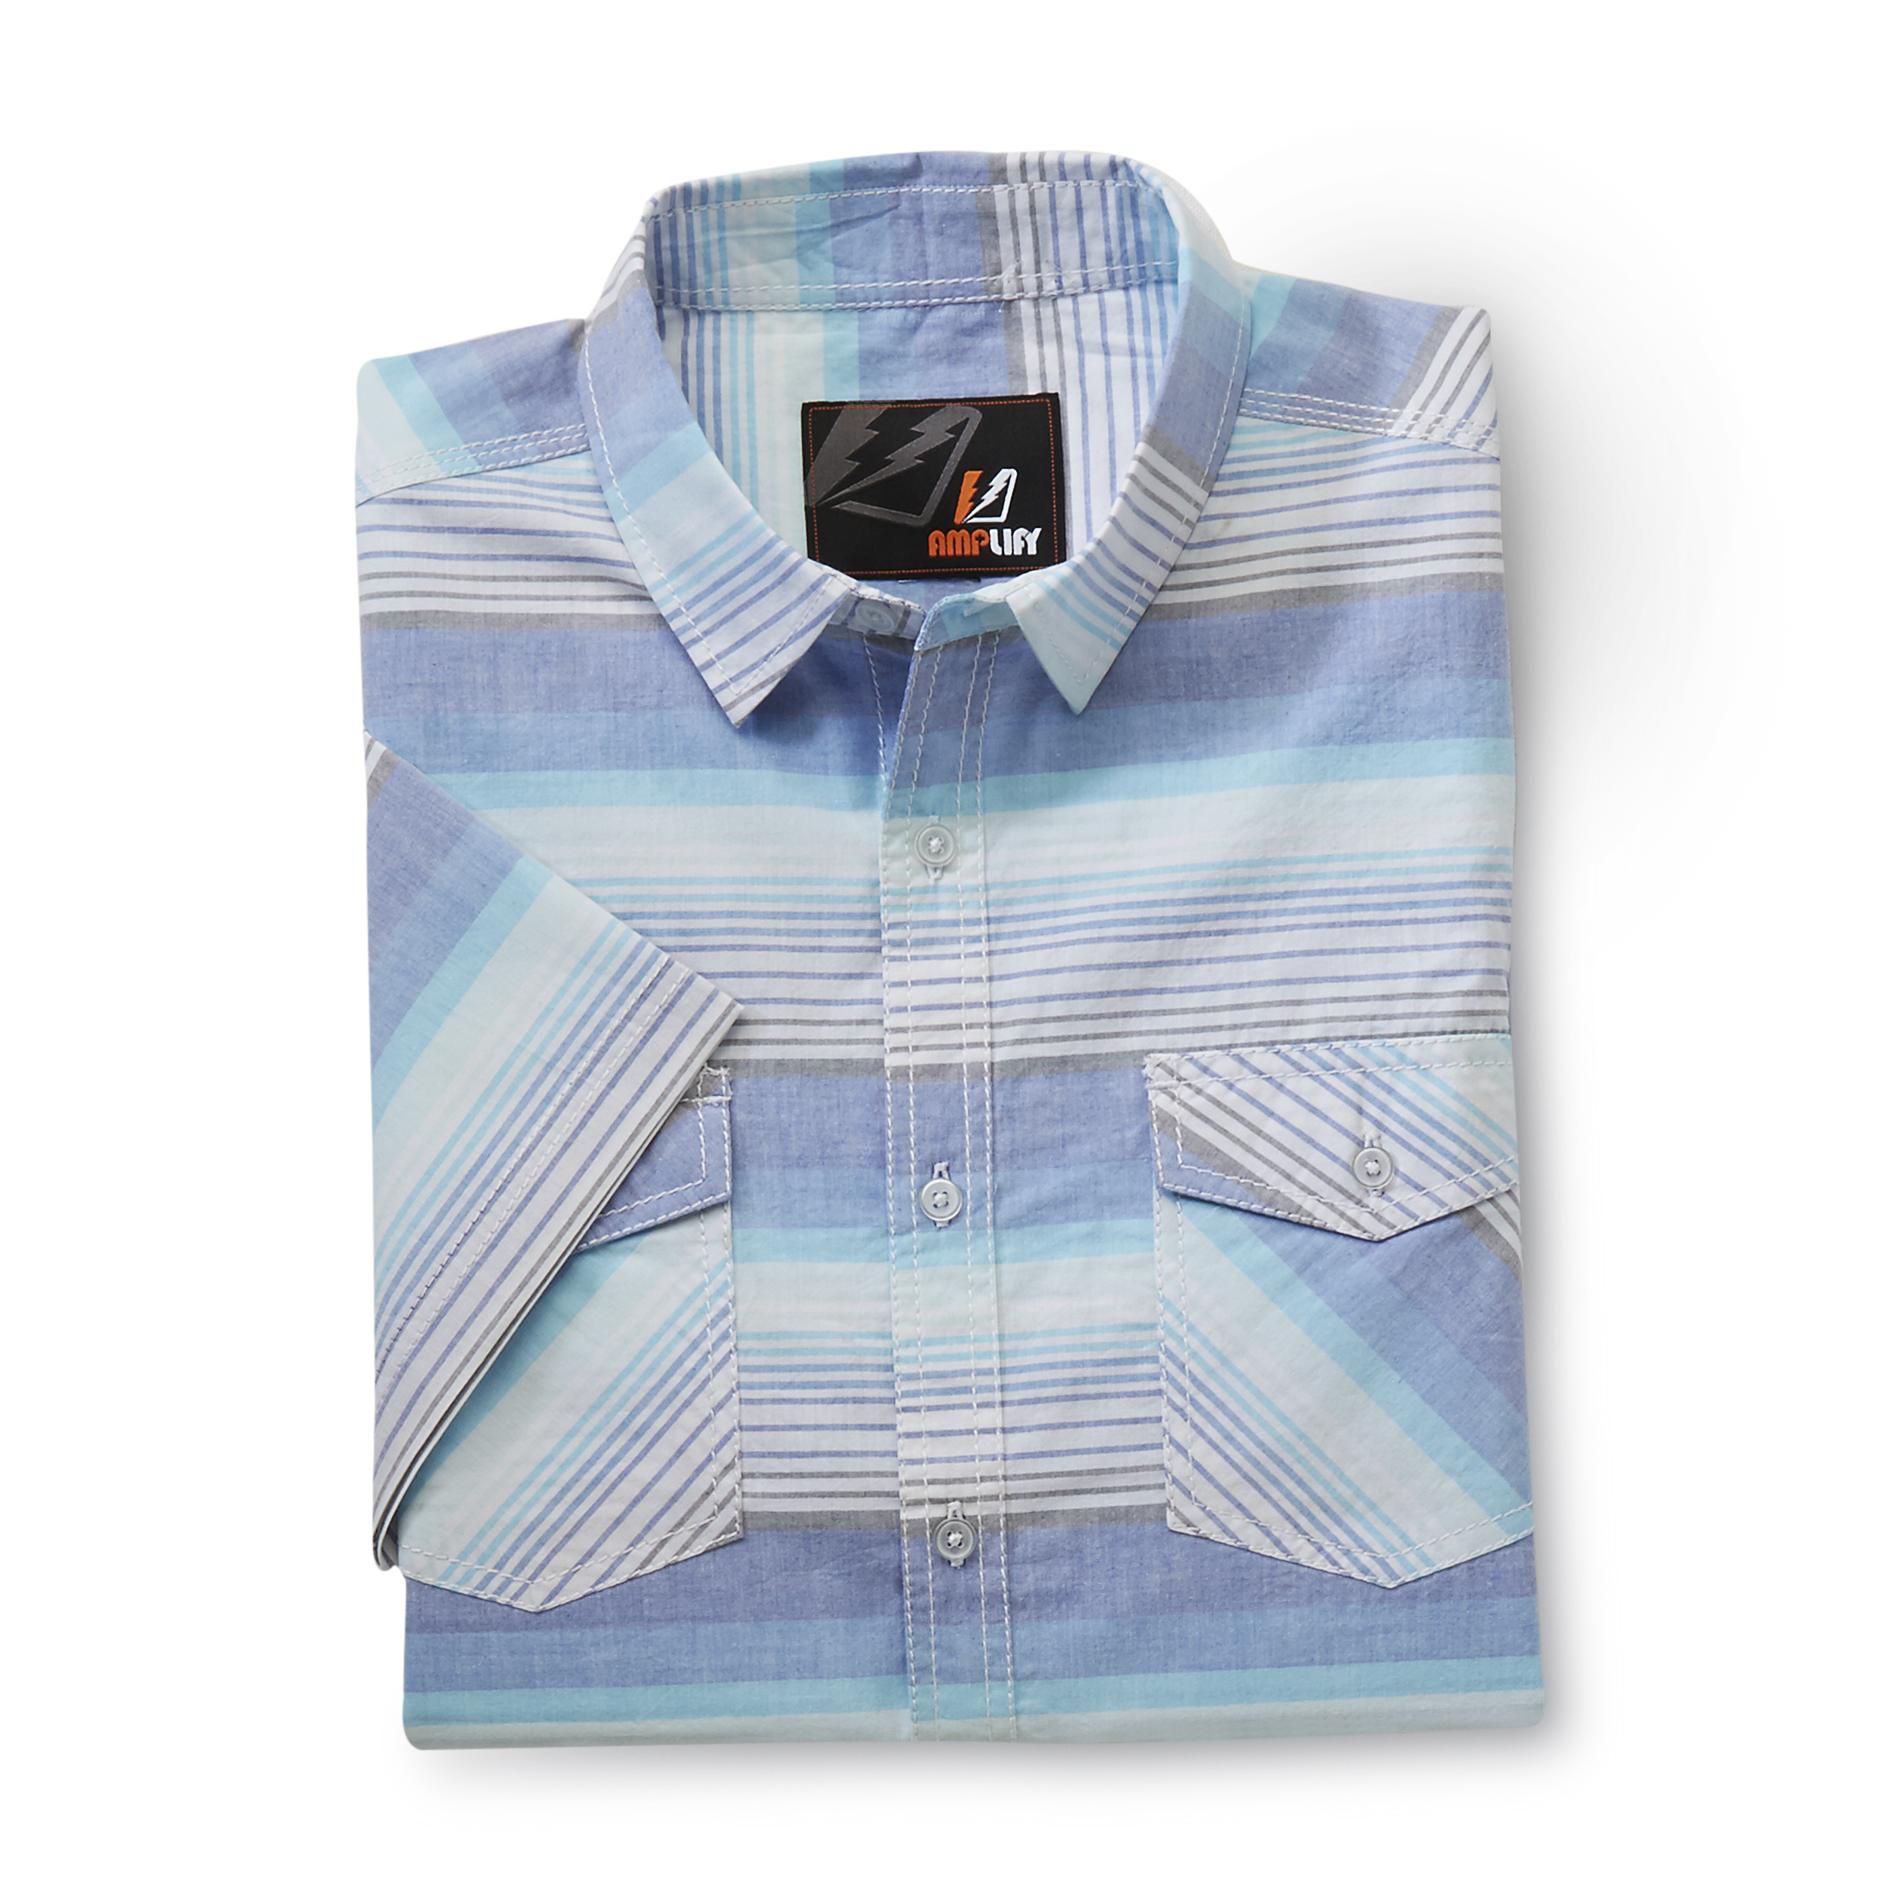 Amplify Young Men's Woven Shirt - Striped